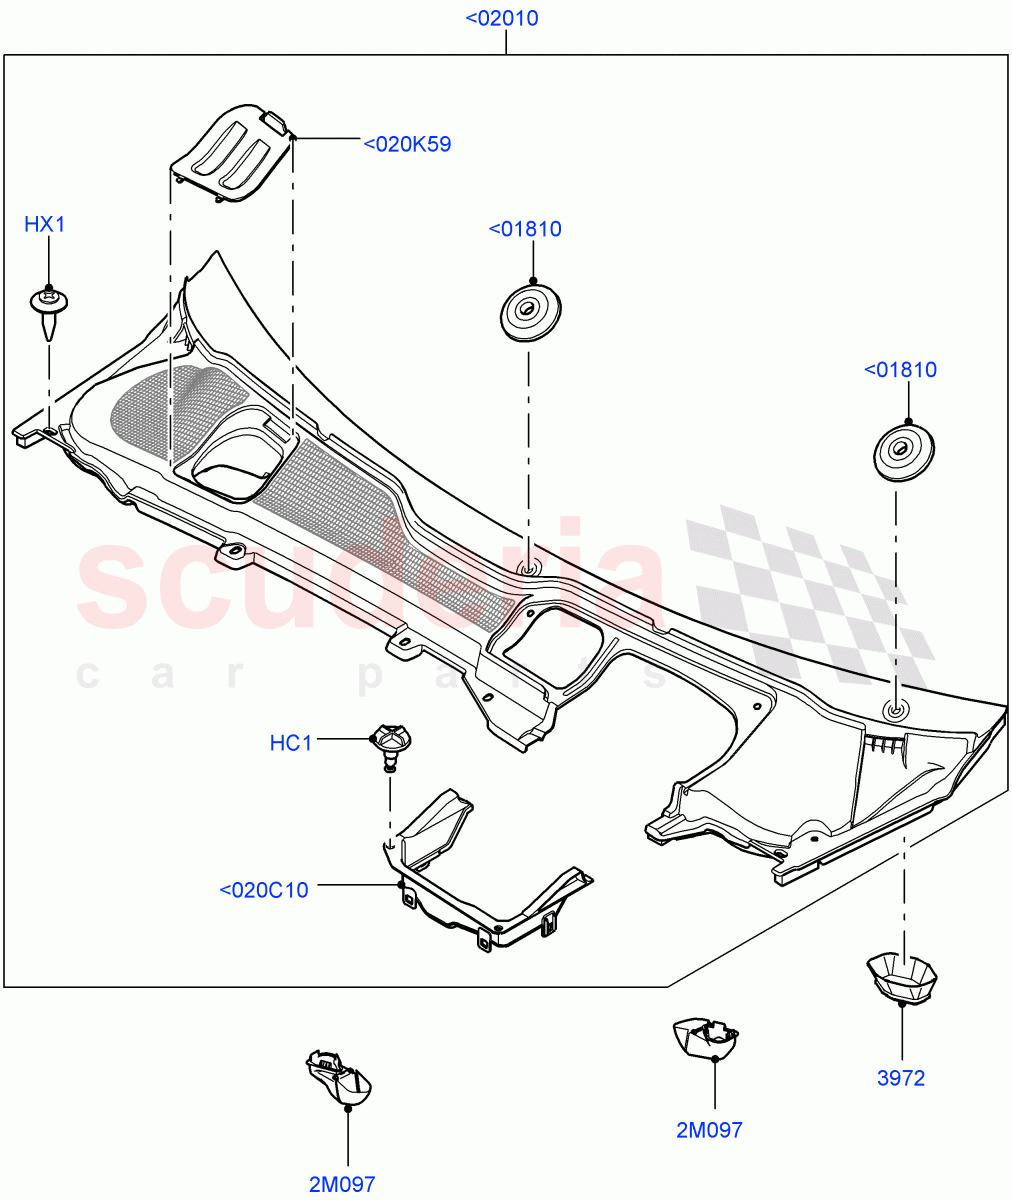 Cowl/Panel And Related Parts(Changsu (China))((V)FROMEG000001) of Land Rover Land Rover Range Rover Evoque (2012-2018) [2.0 Turbo Diesel]